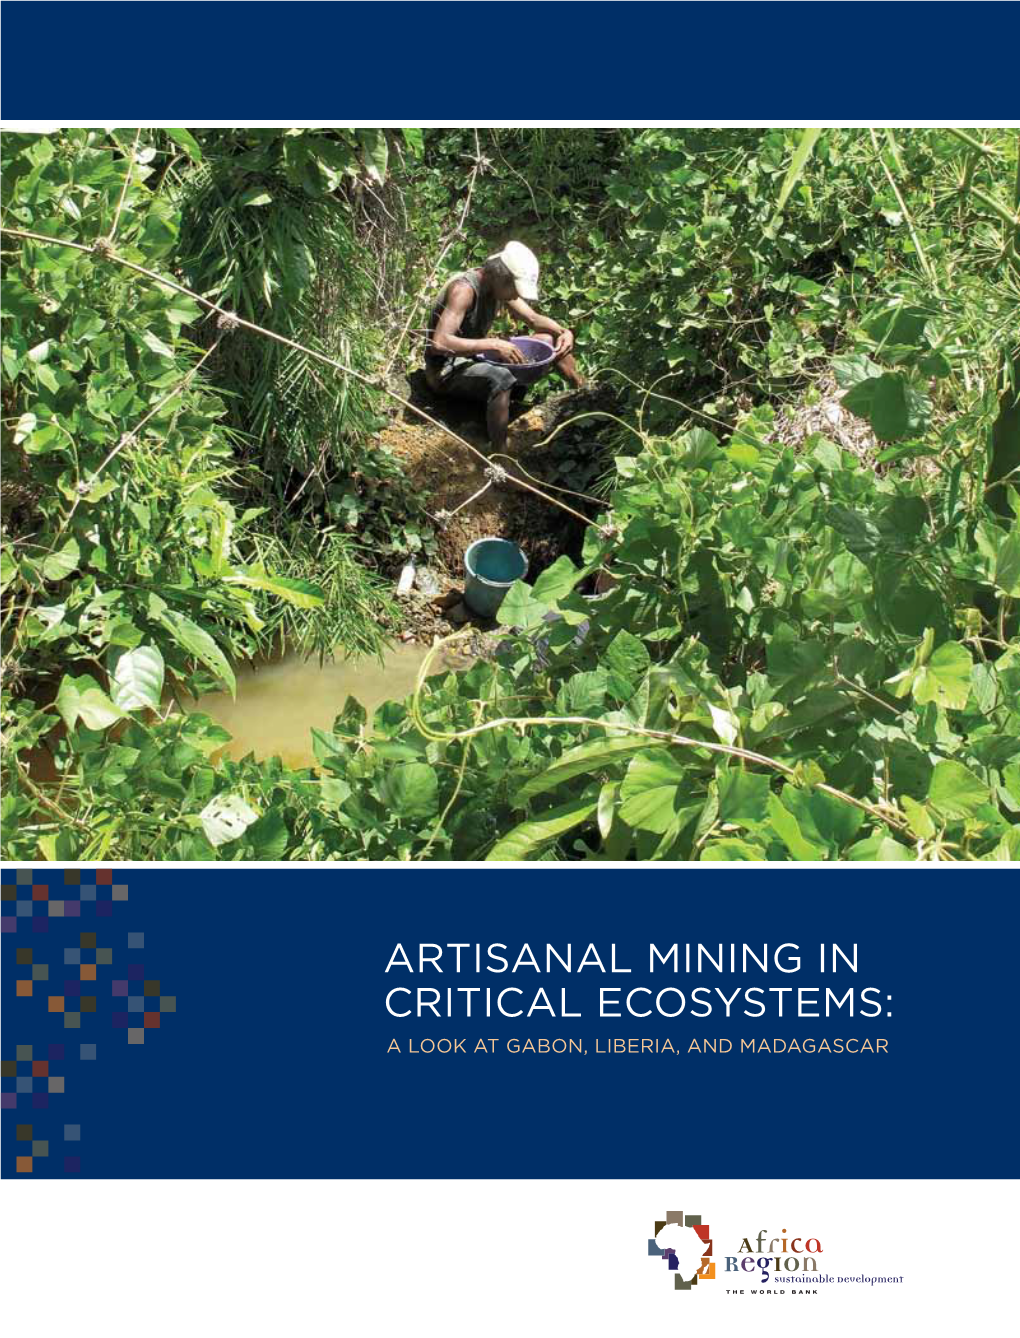 Artisanal Mining in Critical Ecosystems: a Look at Gabon, Liberia, and Madagascar the Minkebe Gold Mining Pit in the Bufferzone of Minkebe National Park, Gabon